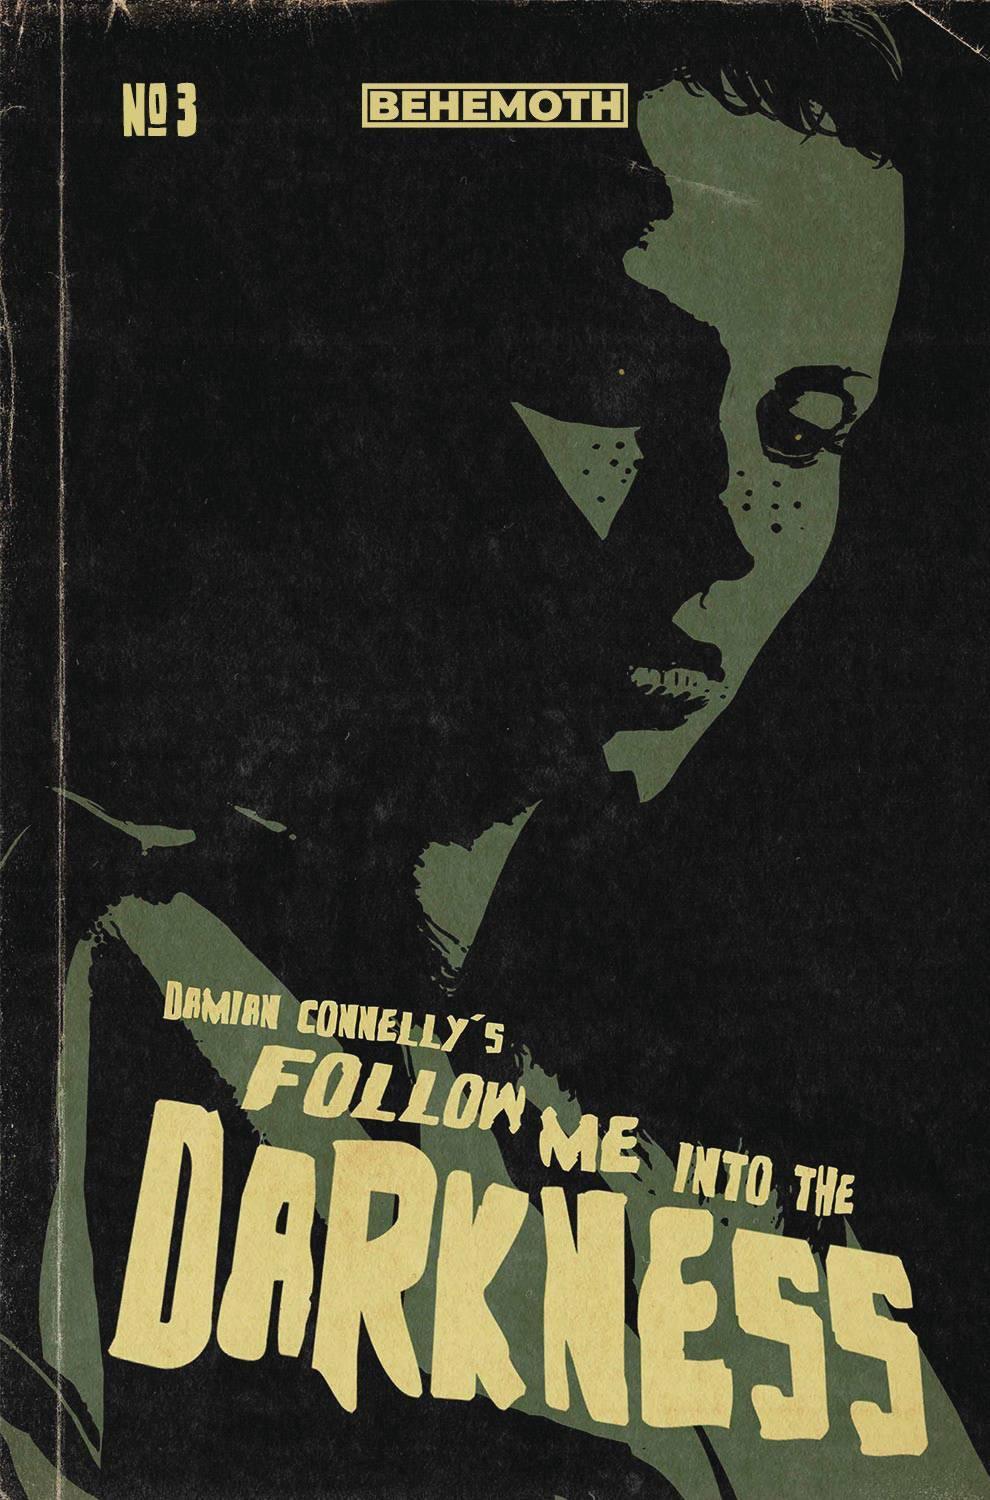 FOLLOW ME INTO THE DARKNESS #3 CVR C CONNELLY - Kings Comics